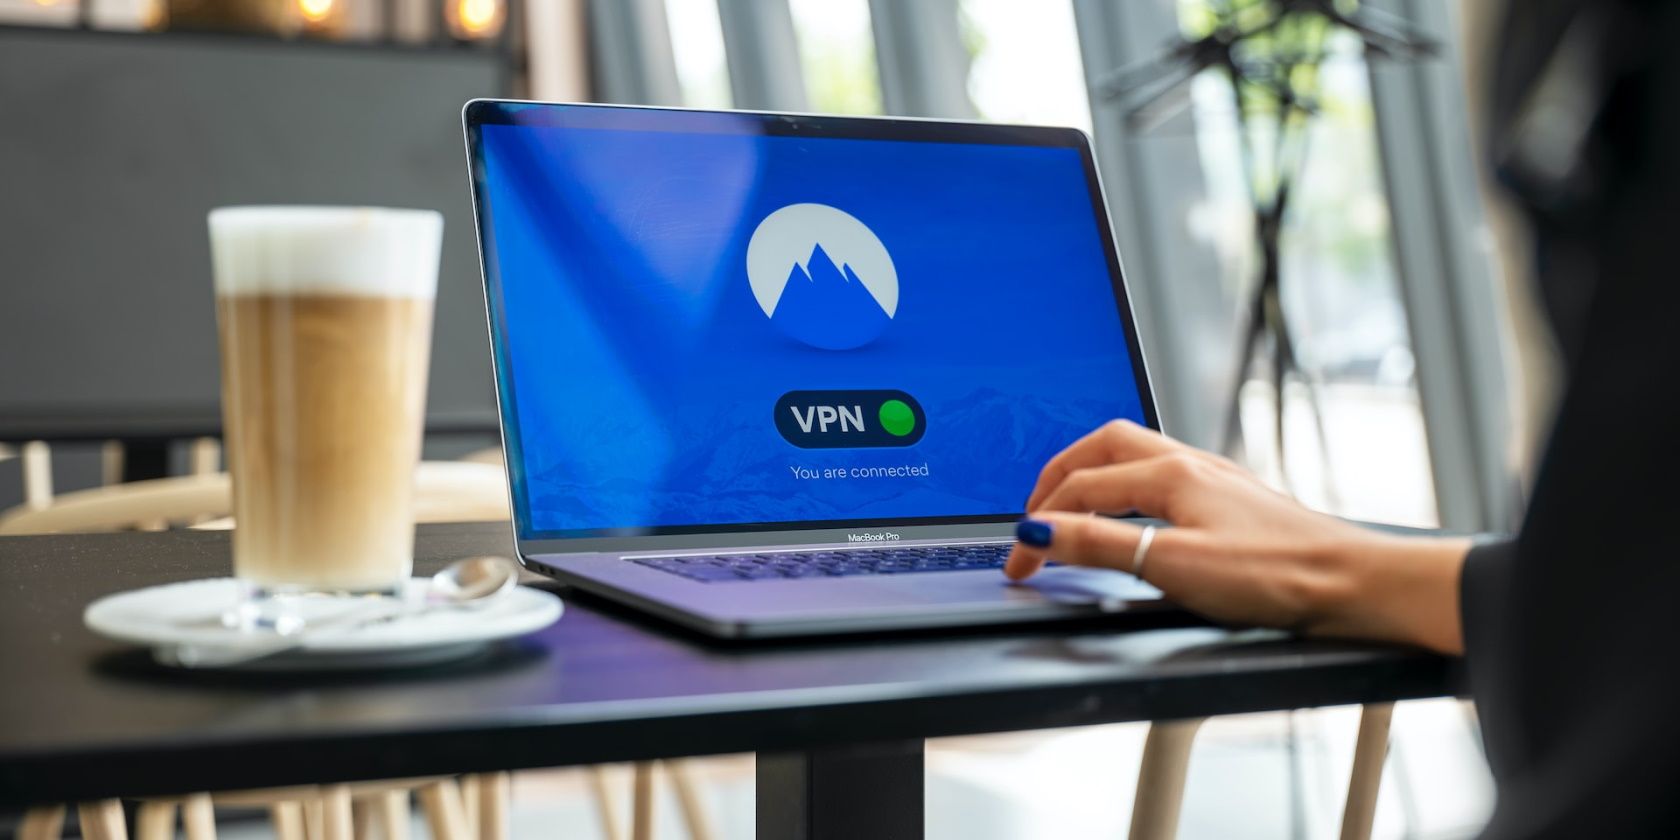 A woman using a VPN tool on her laptop